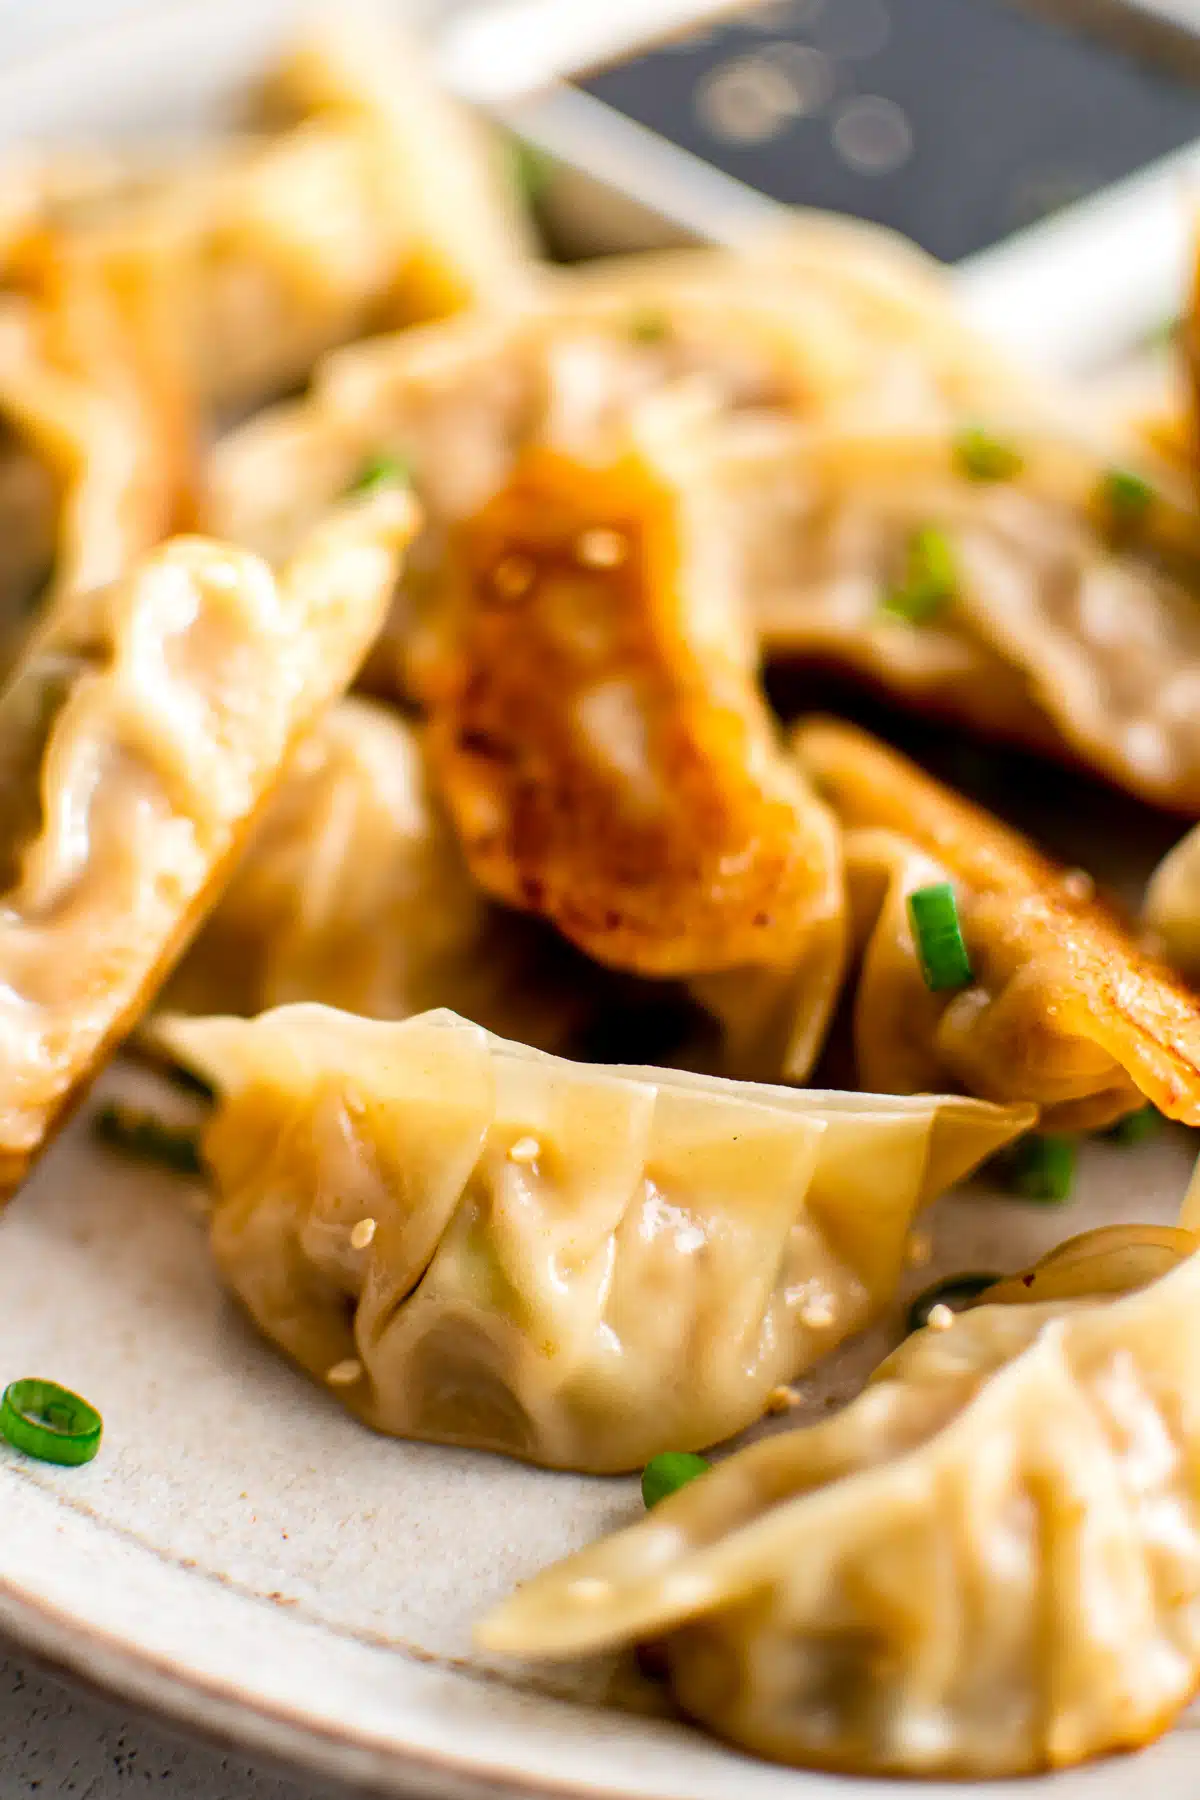 Plate filled with pan-fried pork gyoza garnished with green onions.